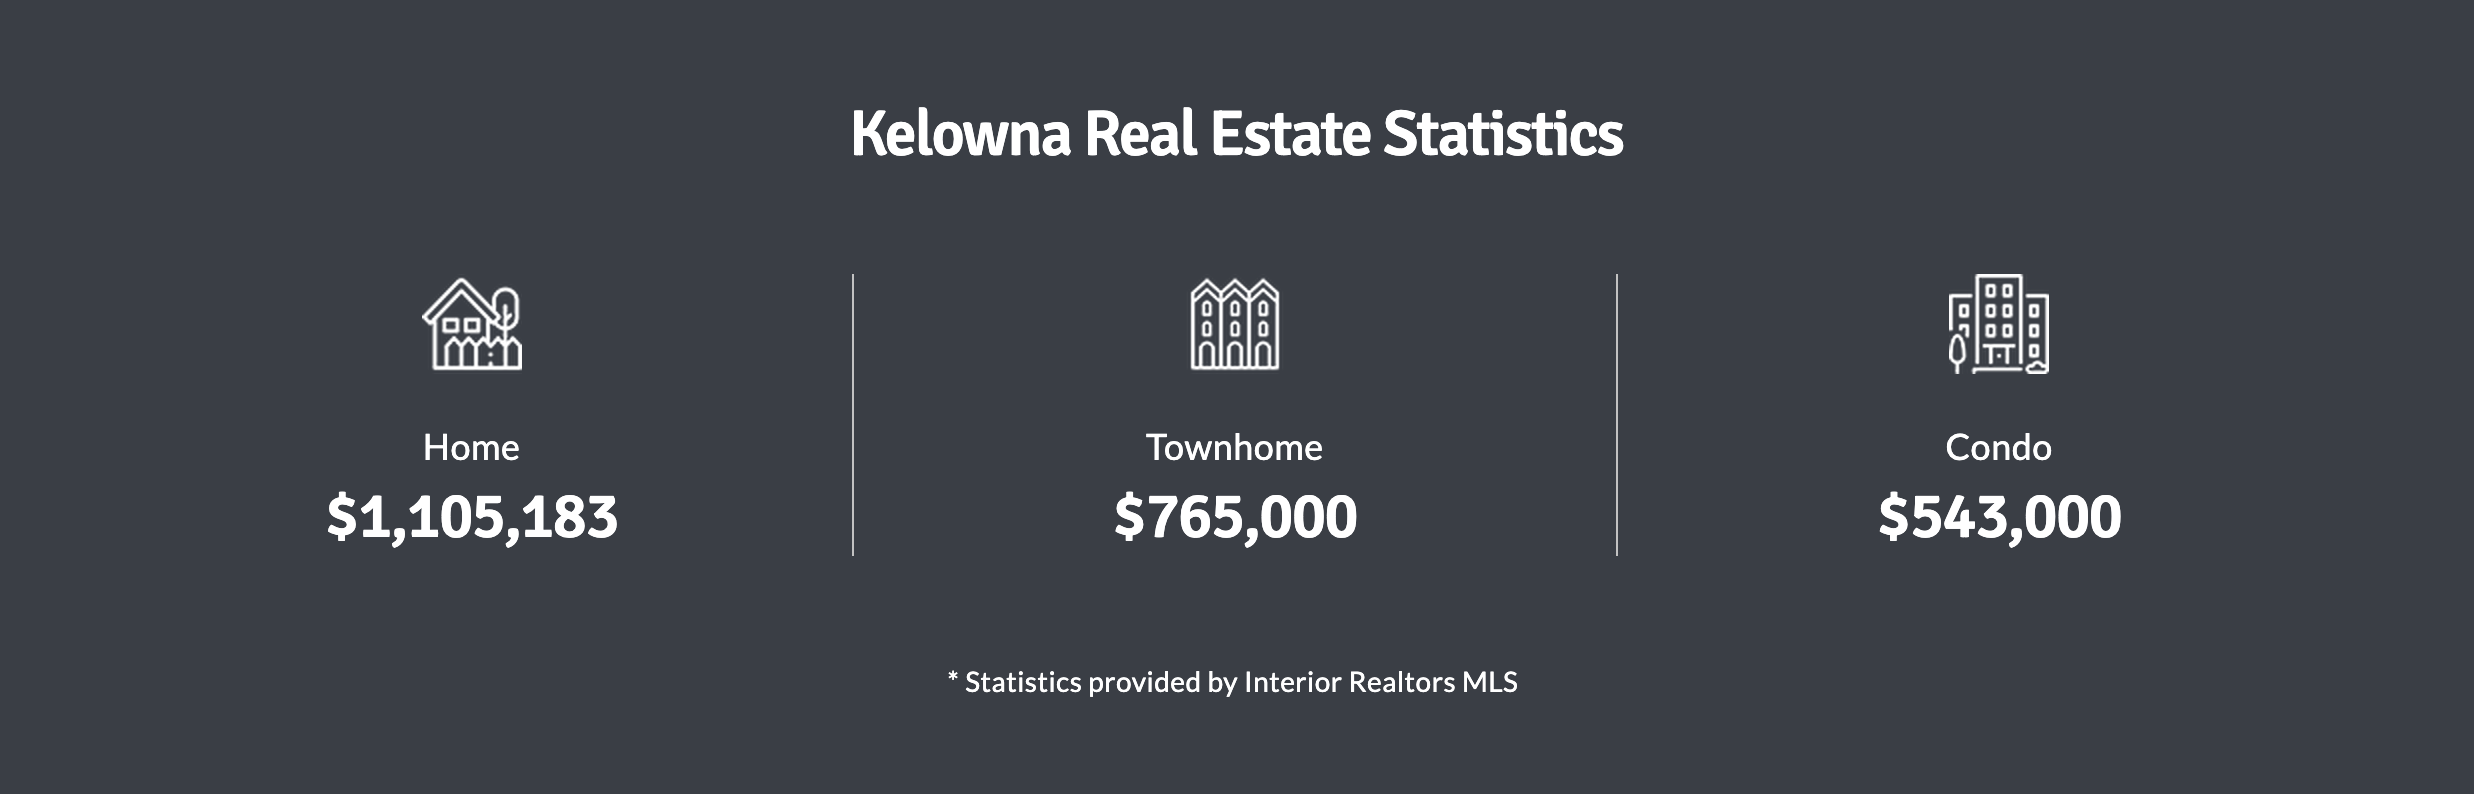 prices showing the average kelowna real estate prices in 2022